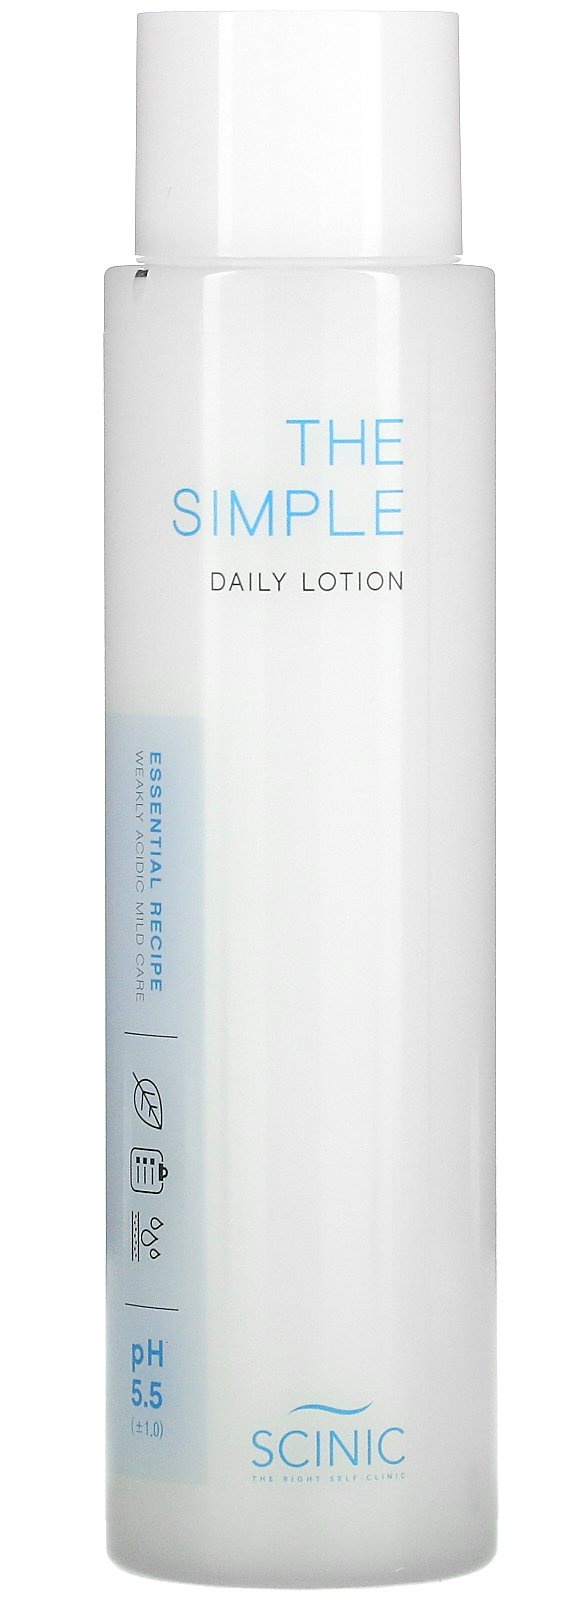 Scinic The Simple Daily Lotion, pH 5.5